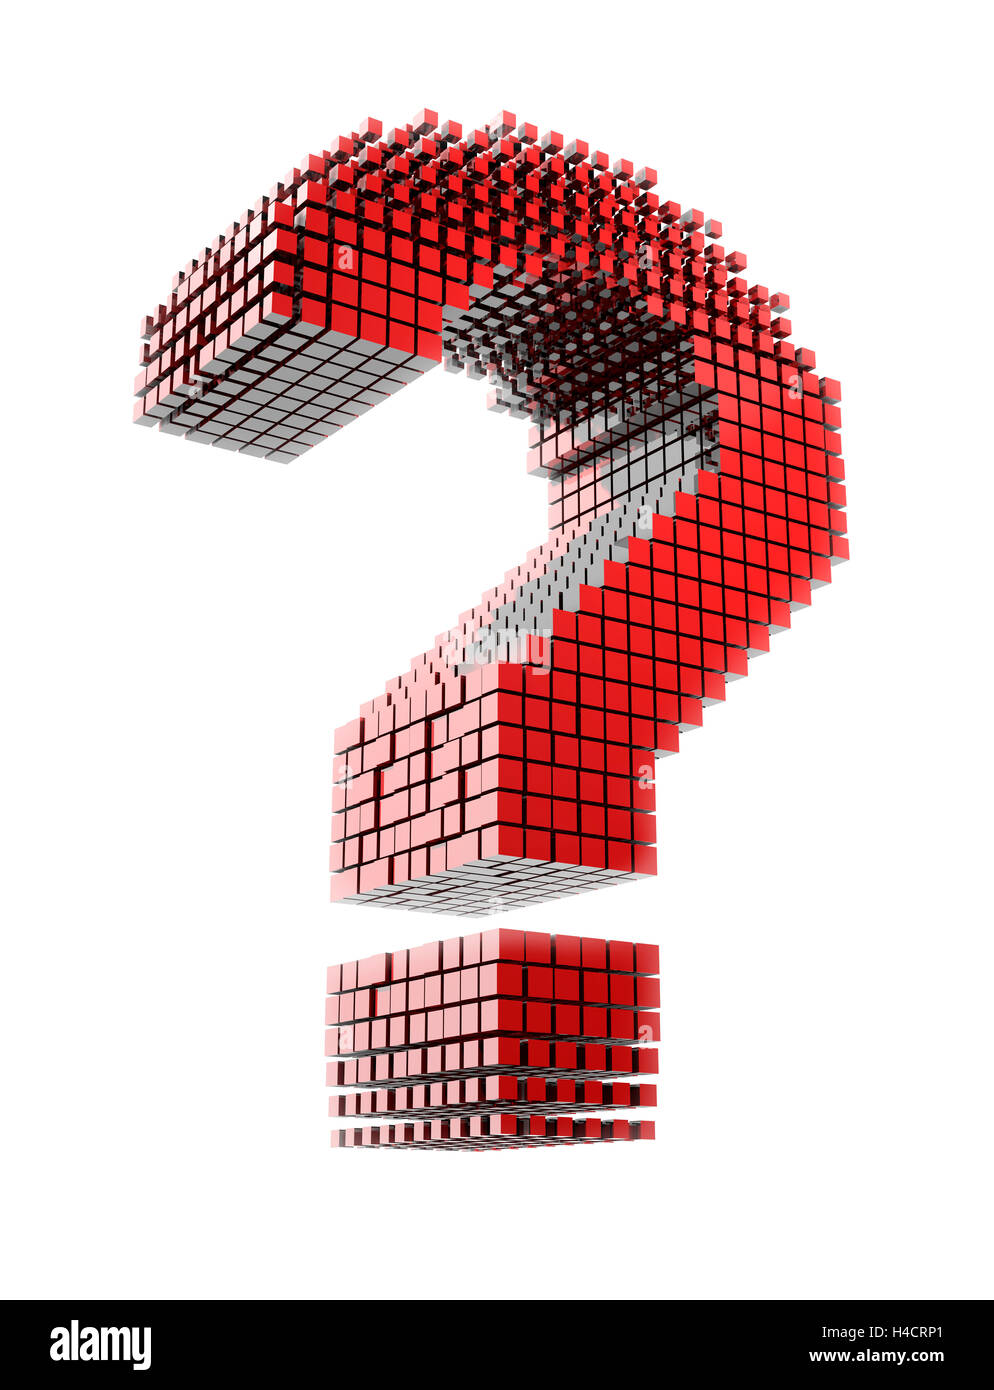 3D-question mark in red material fragments digitally in front of white Hntergrund Stock Photo